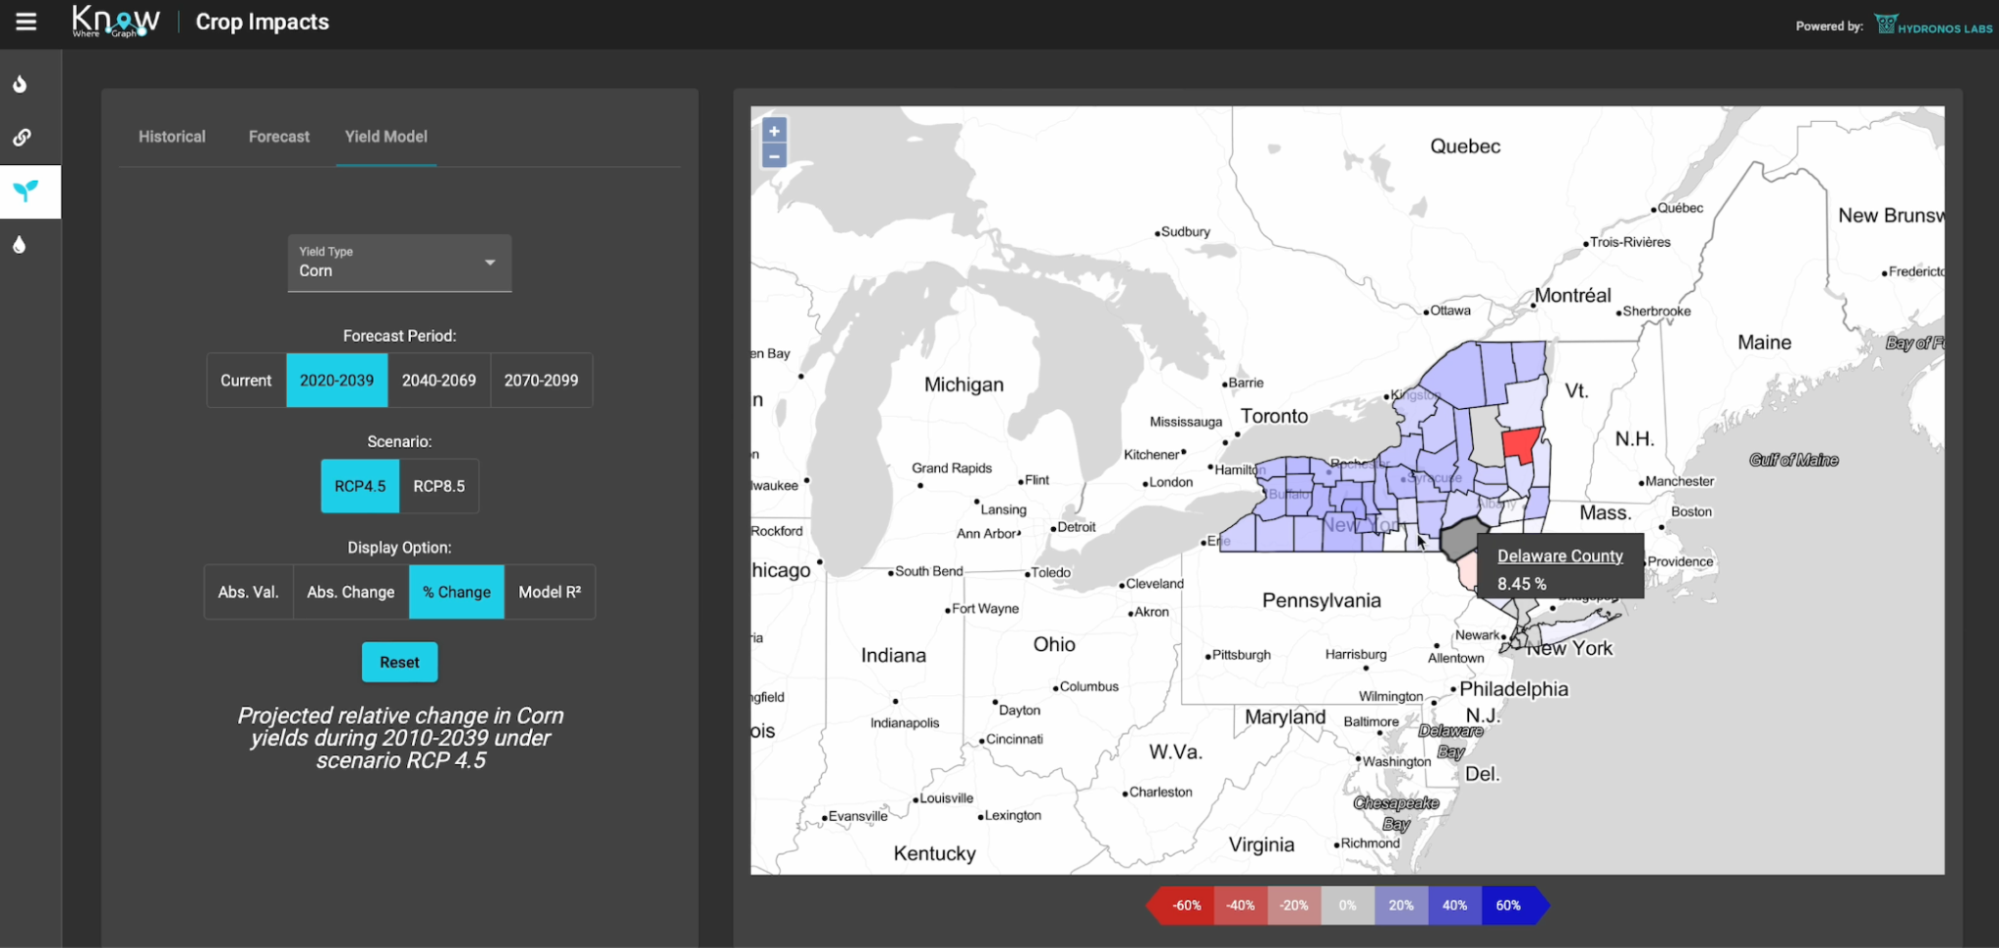 A screenshot of the prototype KnowWhereGraph application for modeling and visualizing the impact of climate change on crop yields and future land value.